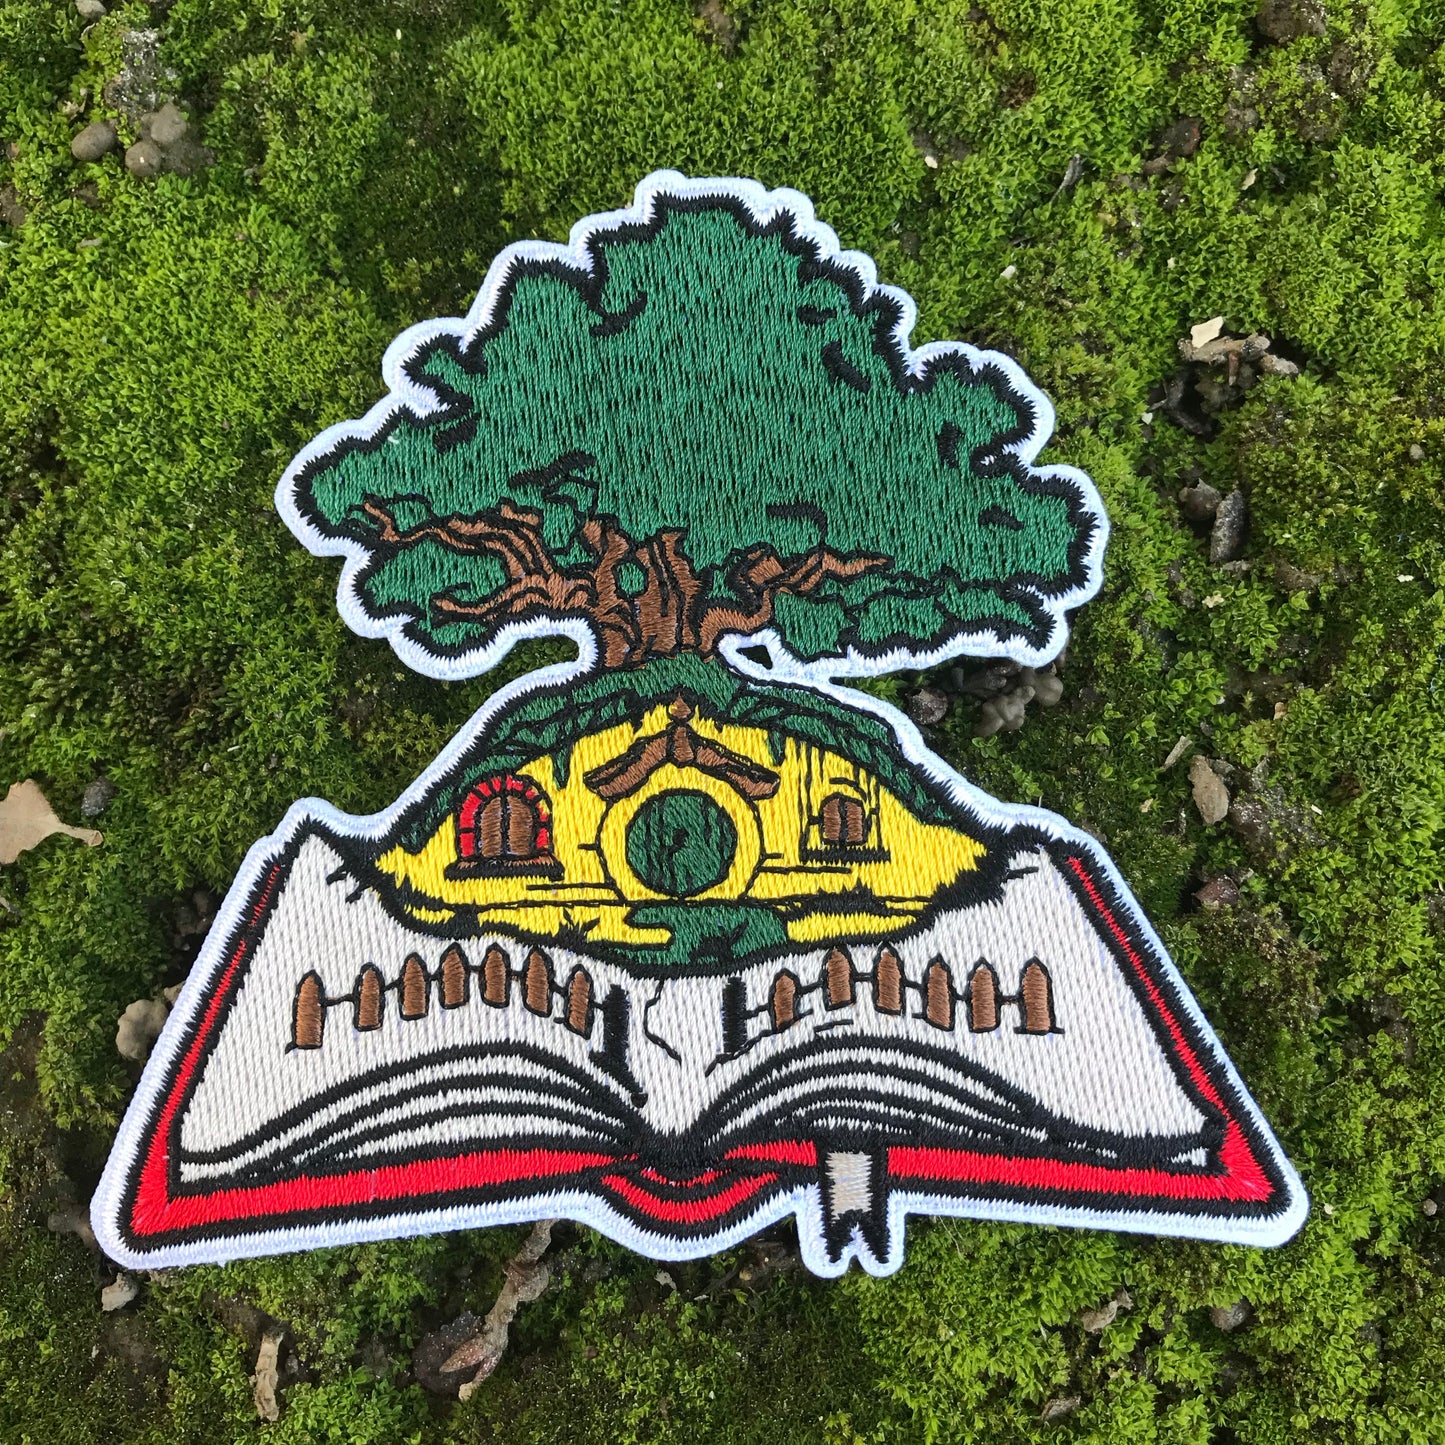 “The Pages of The Shire” embroidered patch